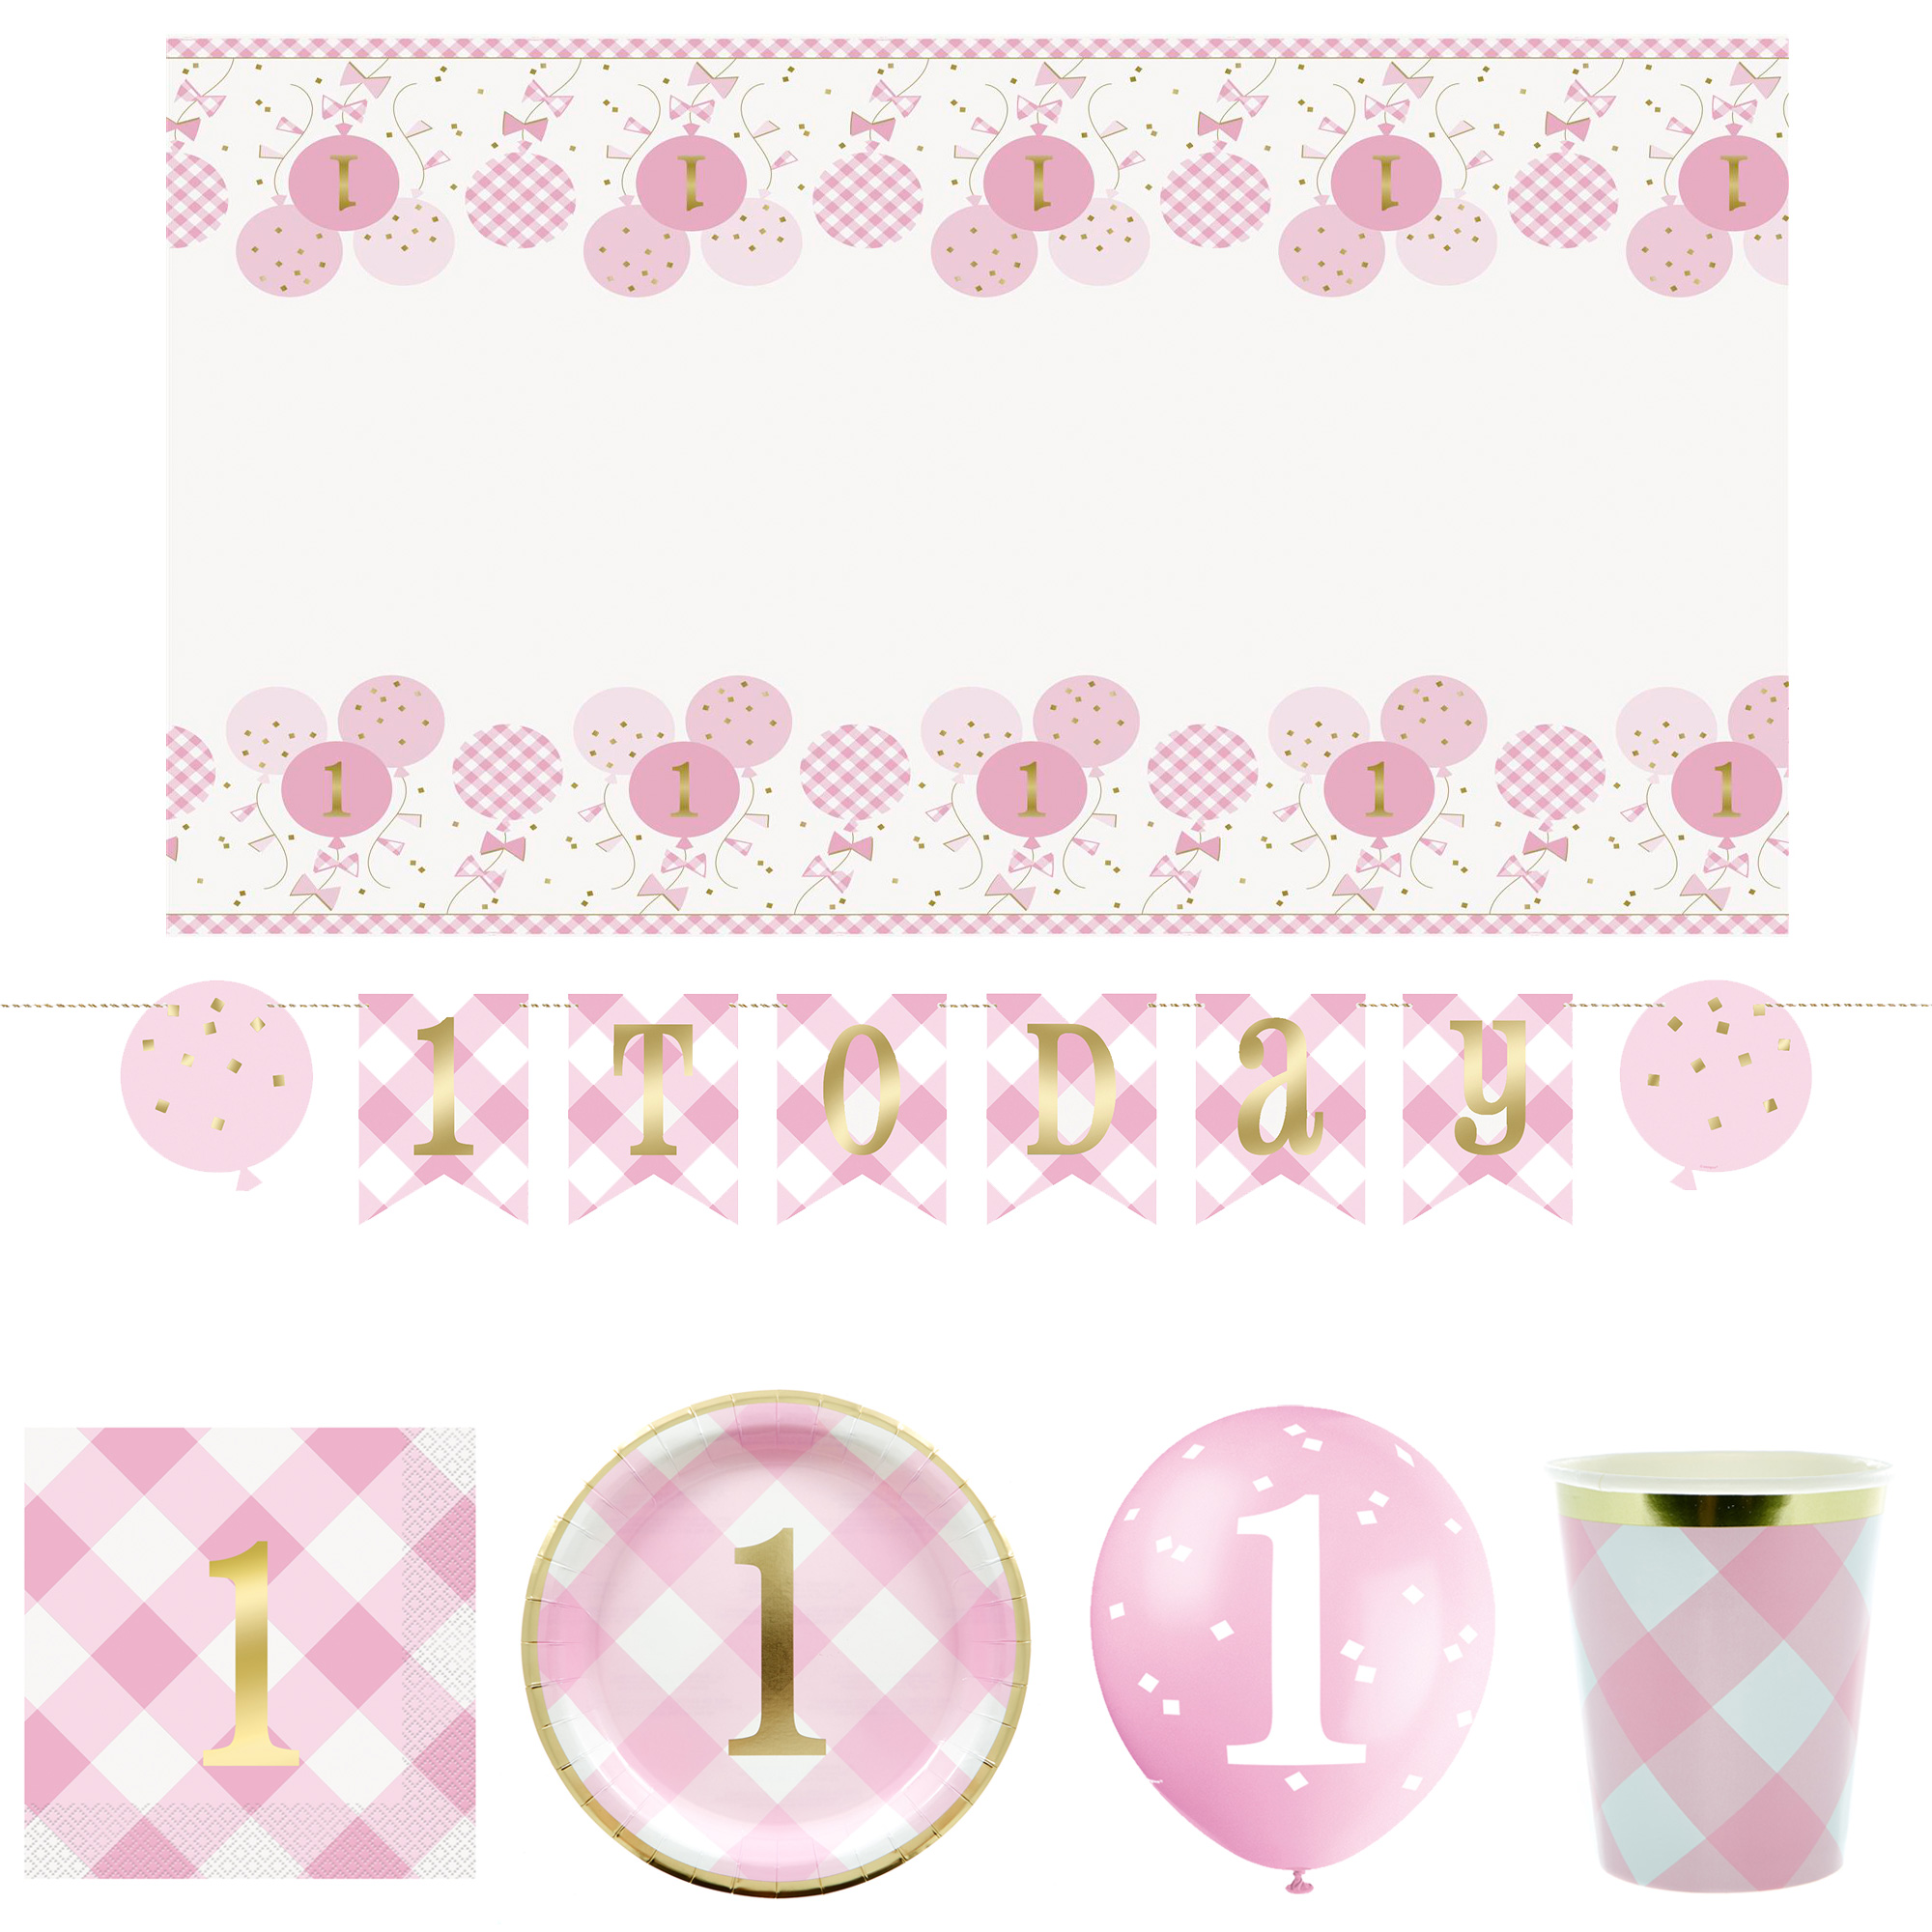 Pink Gingham 1st Birthday Party Tableware & Decorations Bundle - 16 Guests